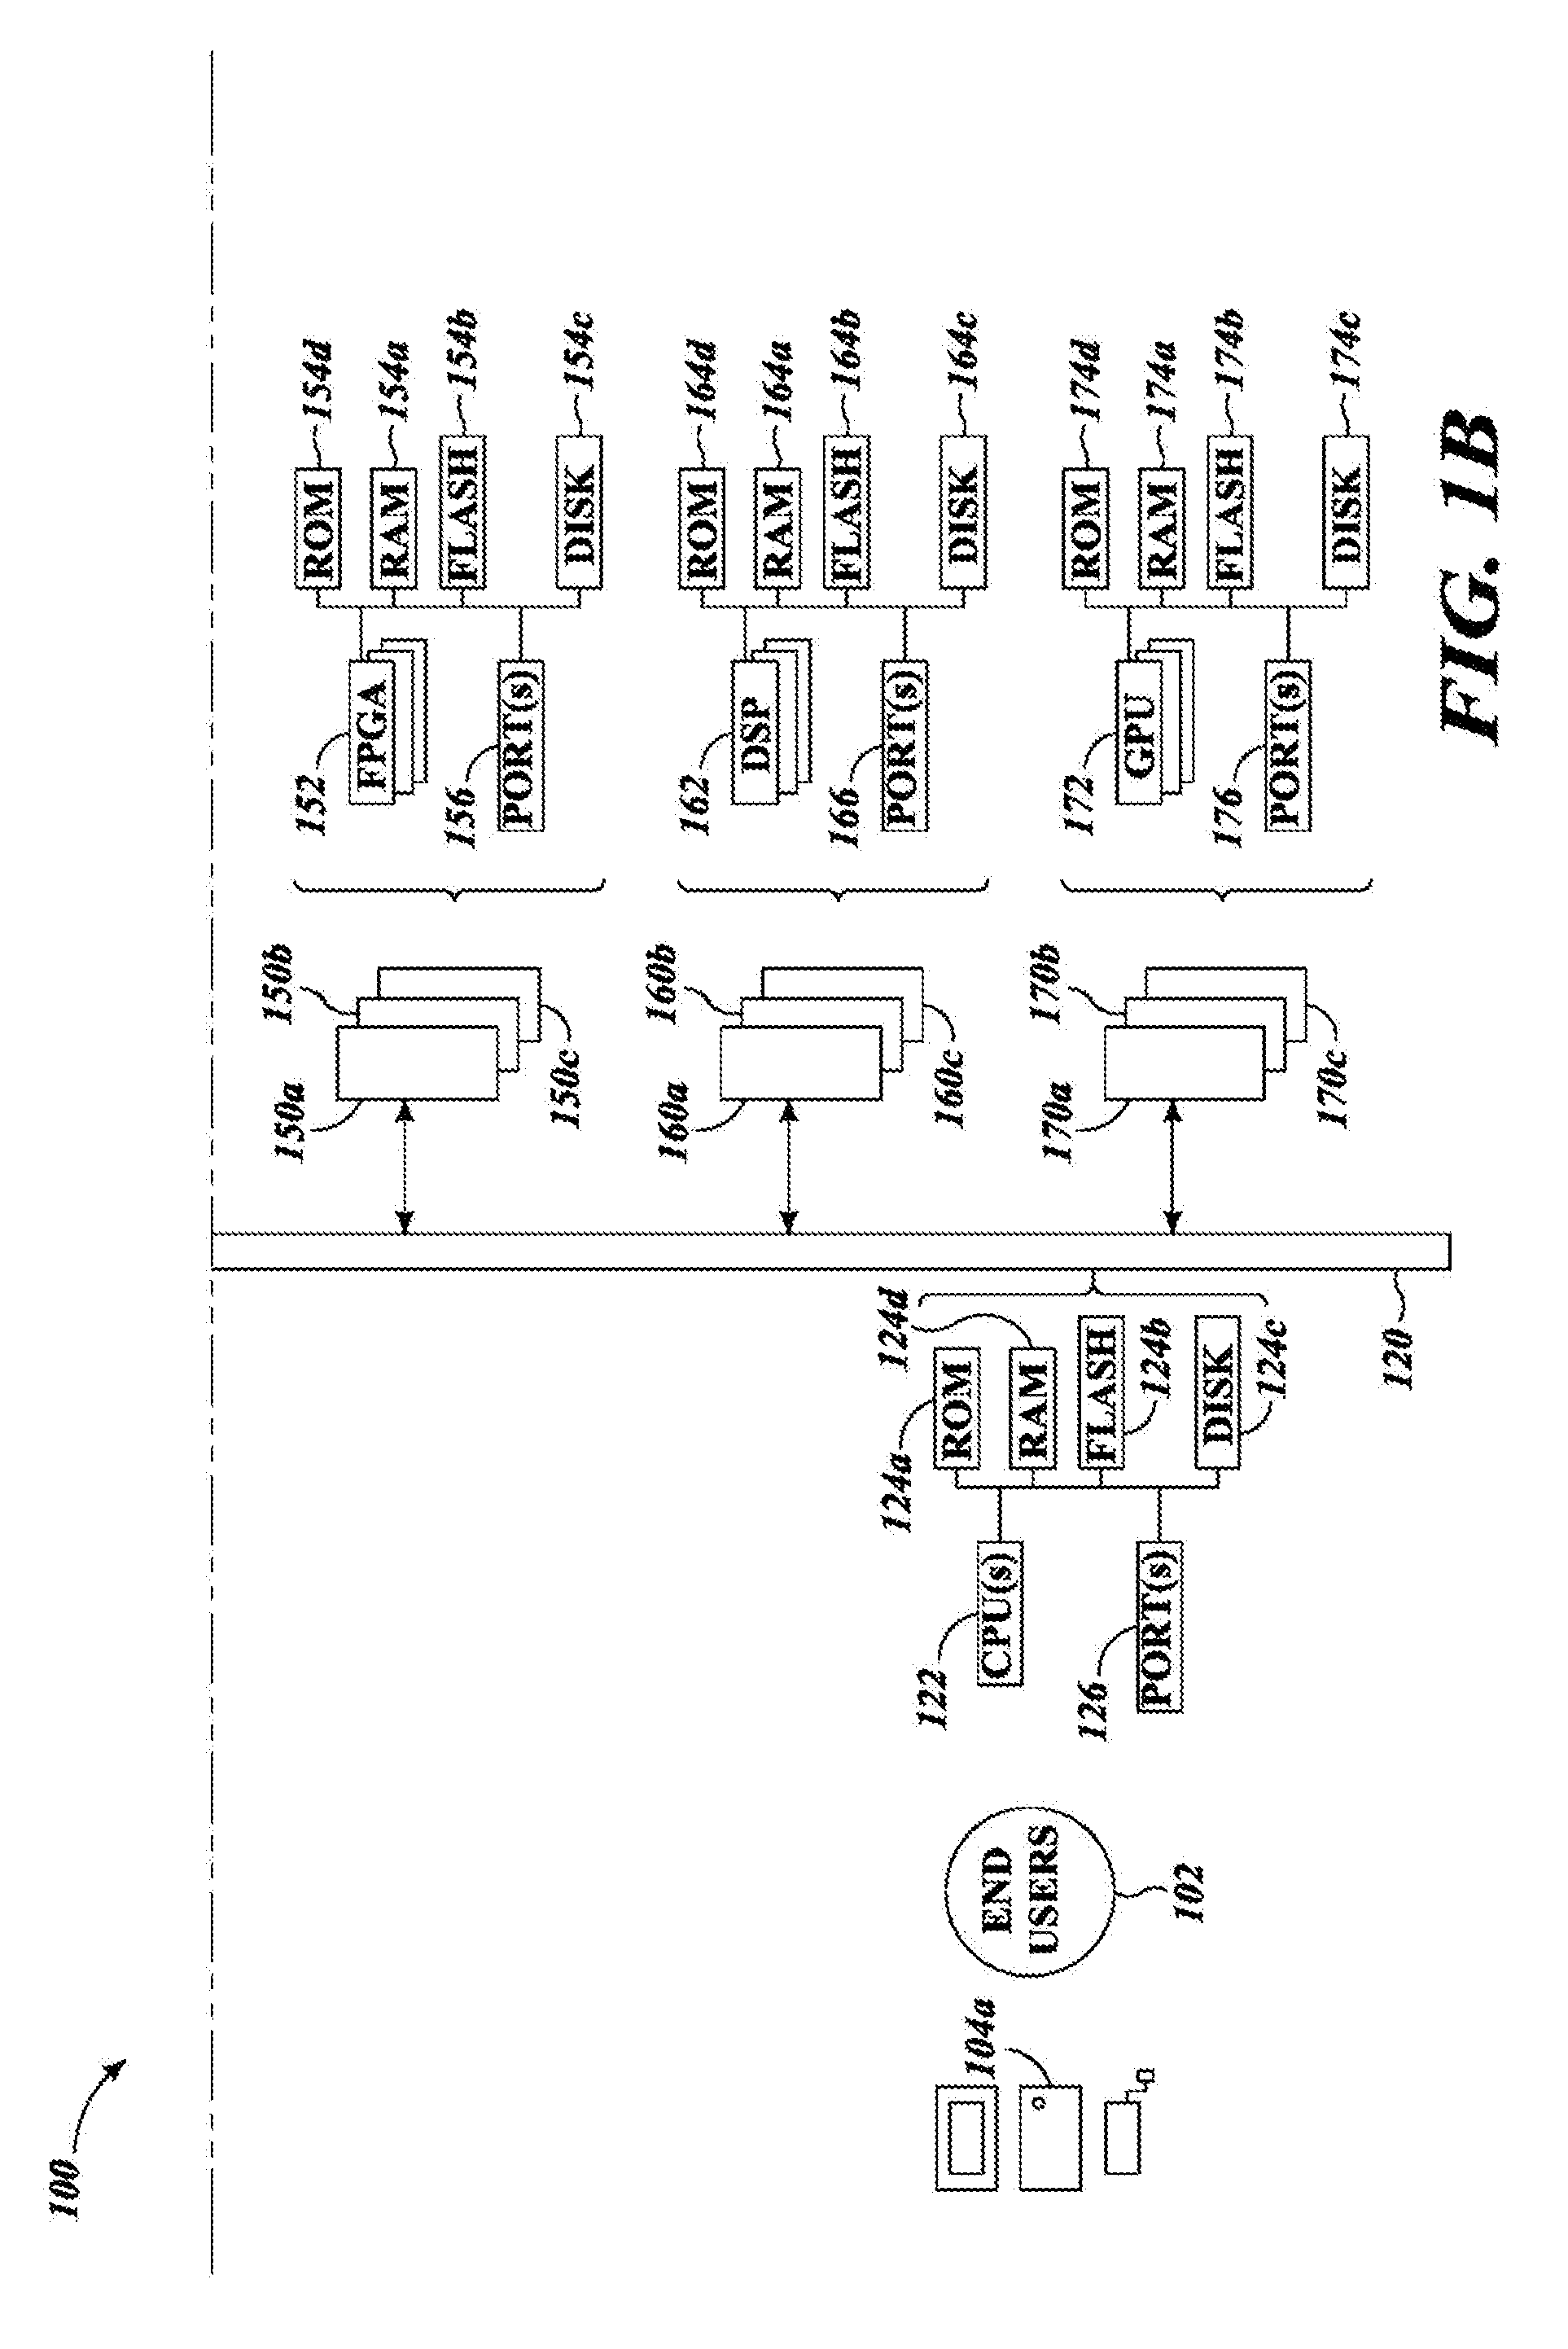 Systems and methods for improving the performance of a quantum processor to reduce intrinsic/control errors